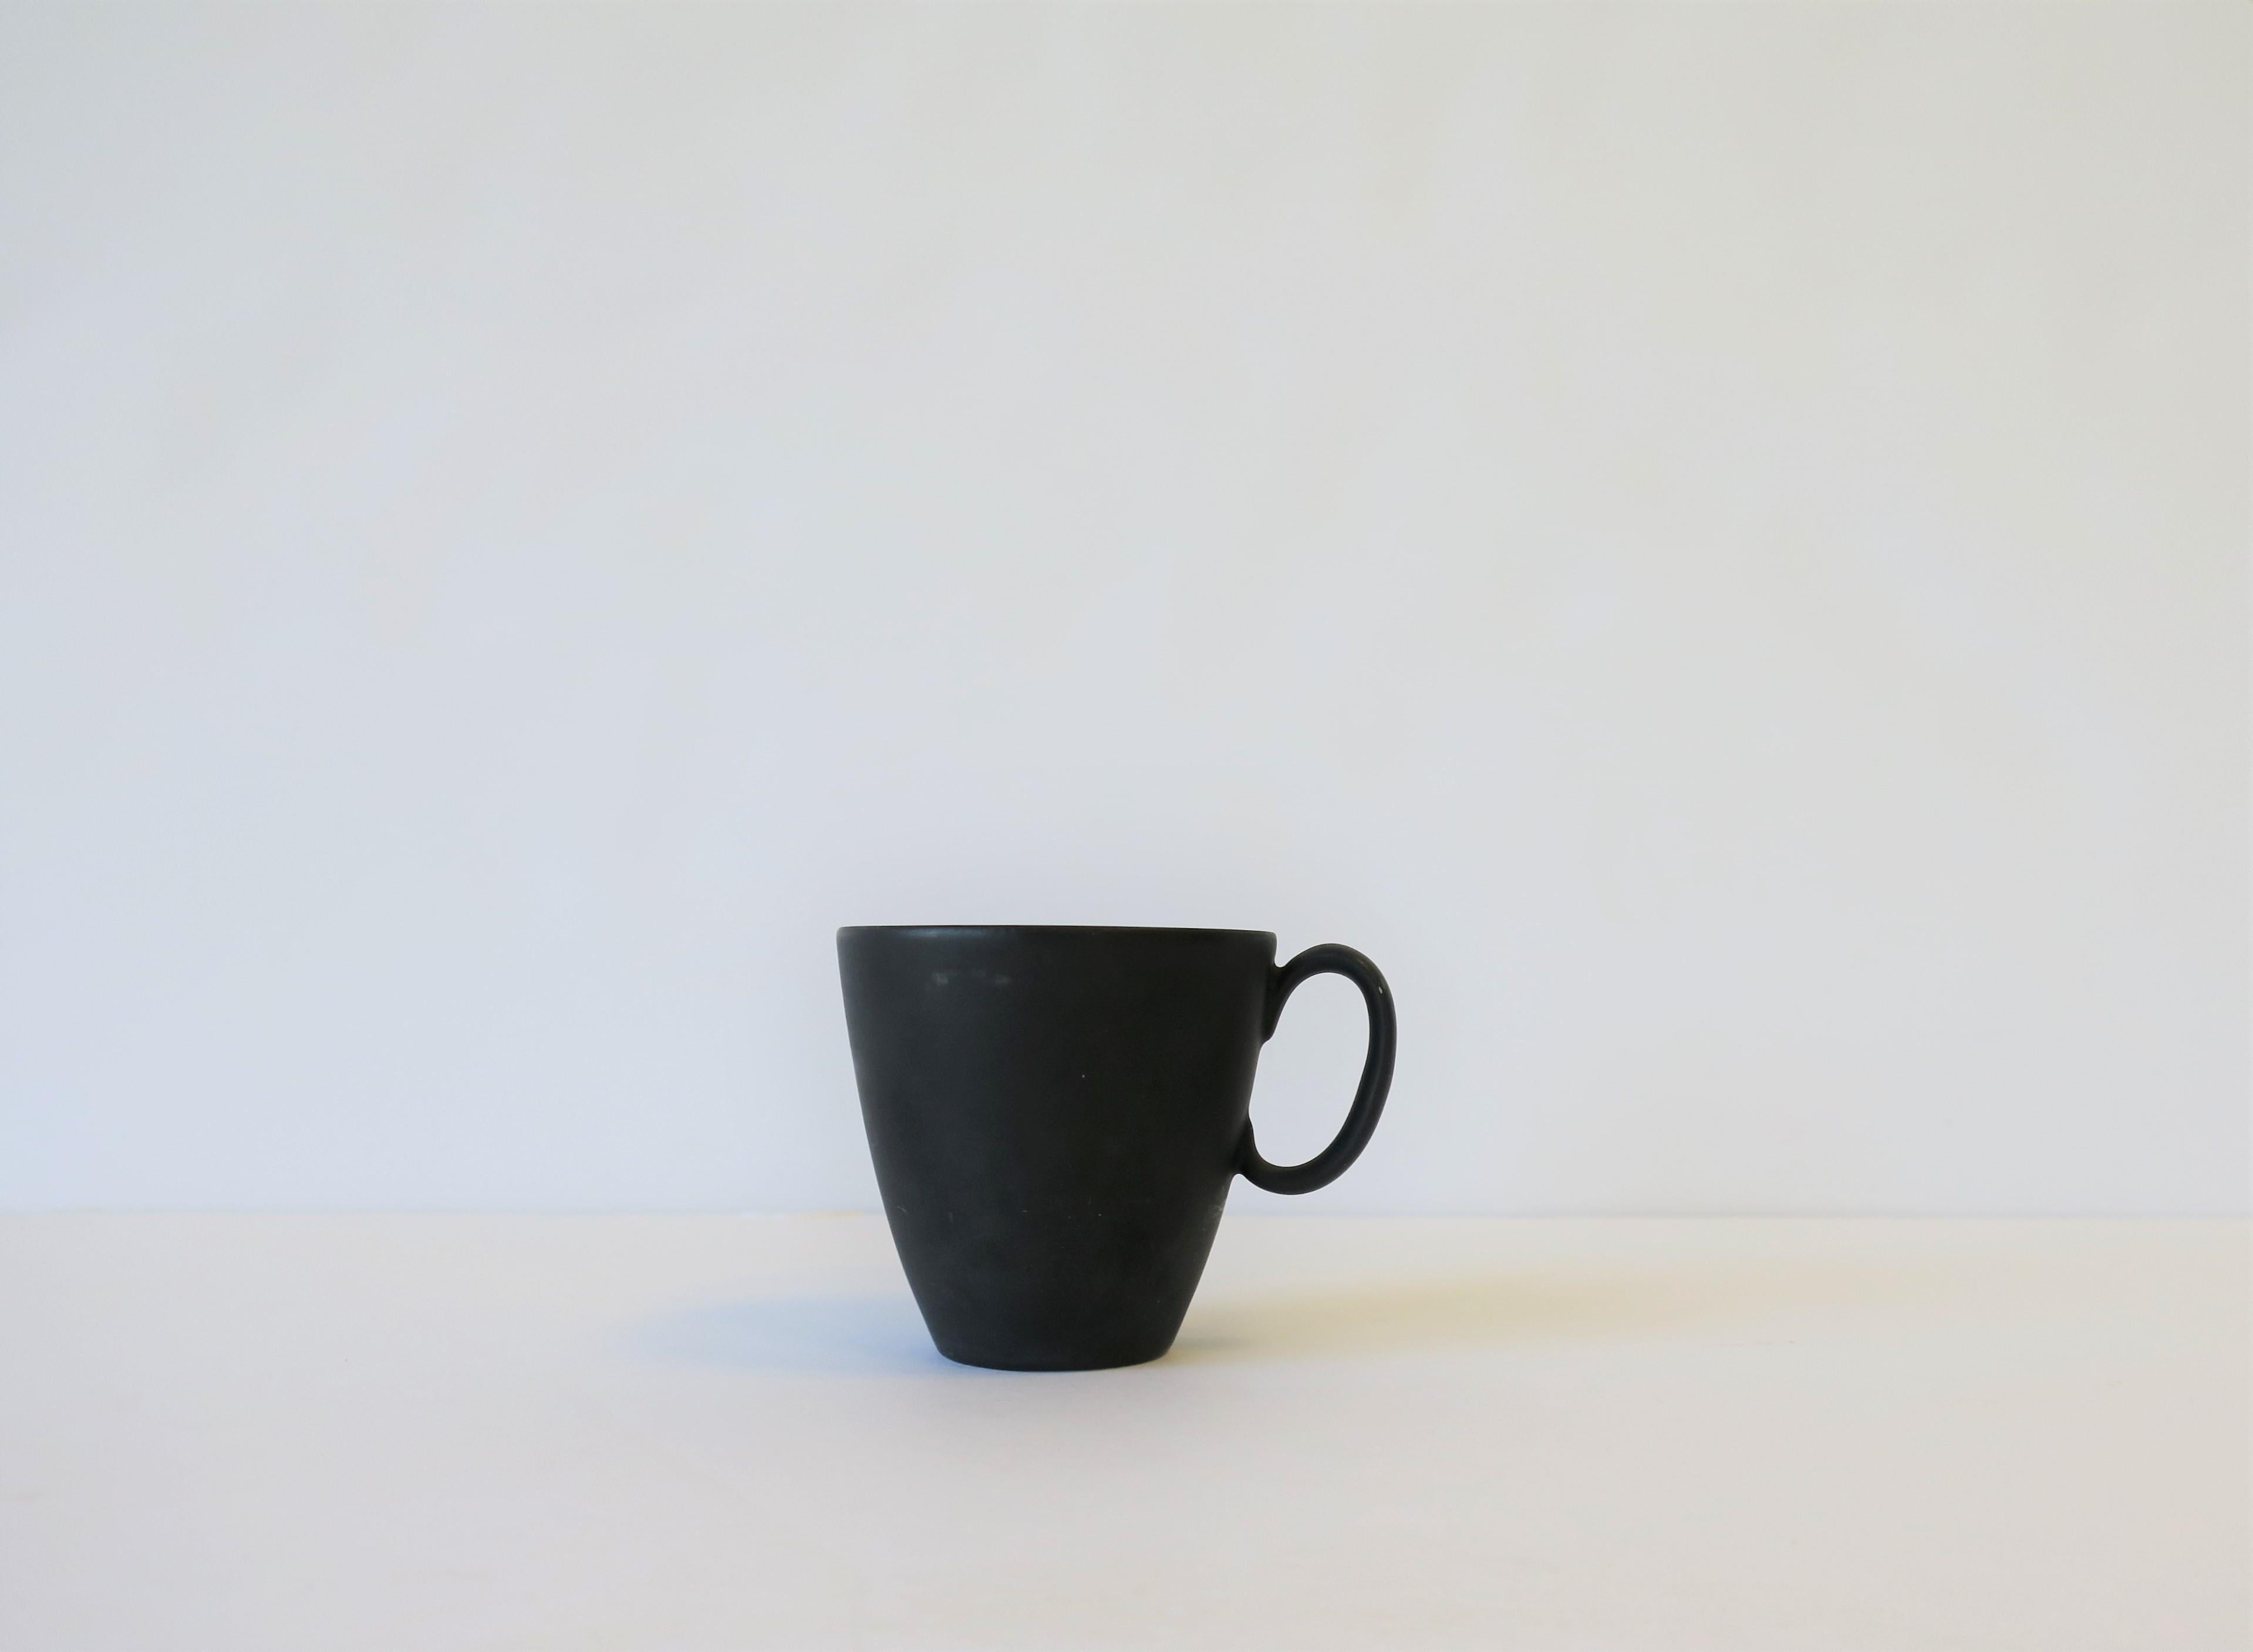 A beautiful matte black or 'charcoal' and white espresso coffee or tea demitasse cup by designer Raymond Loewy. Porcelain cup has a matte black or 'charcoal' exterior and a white glazed interior. With maker's mark on bottom as show in image #7. Made